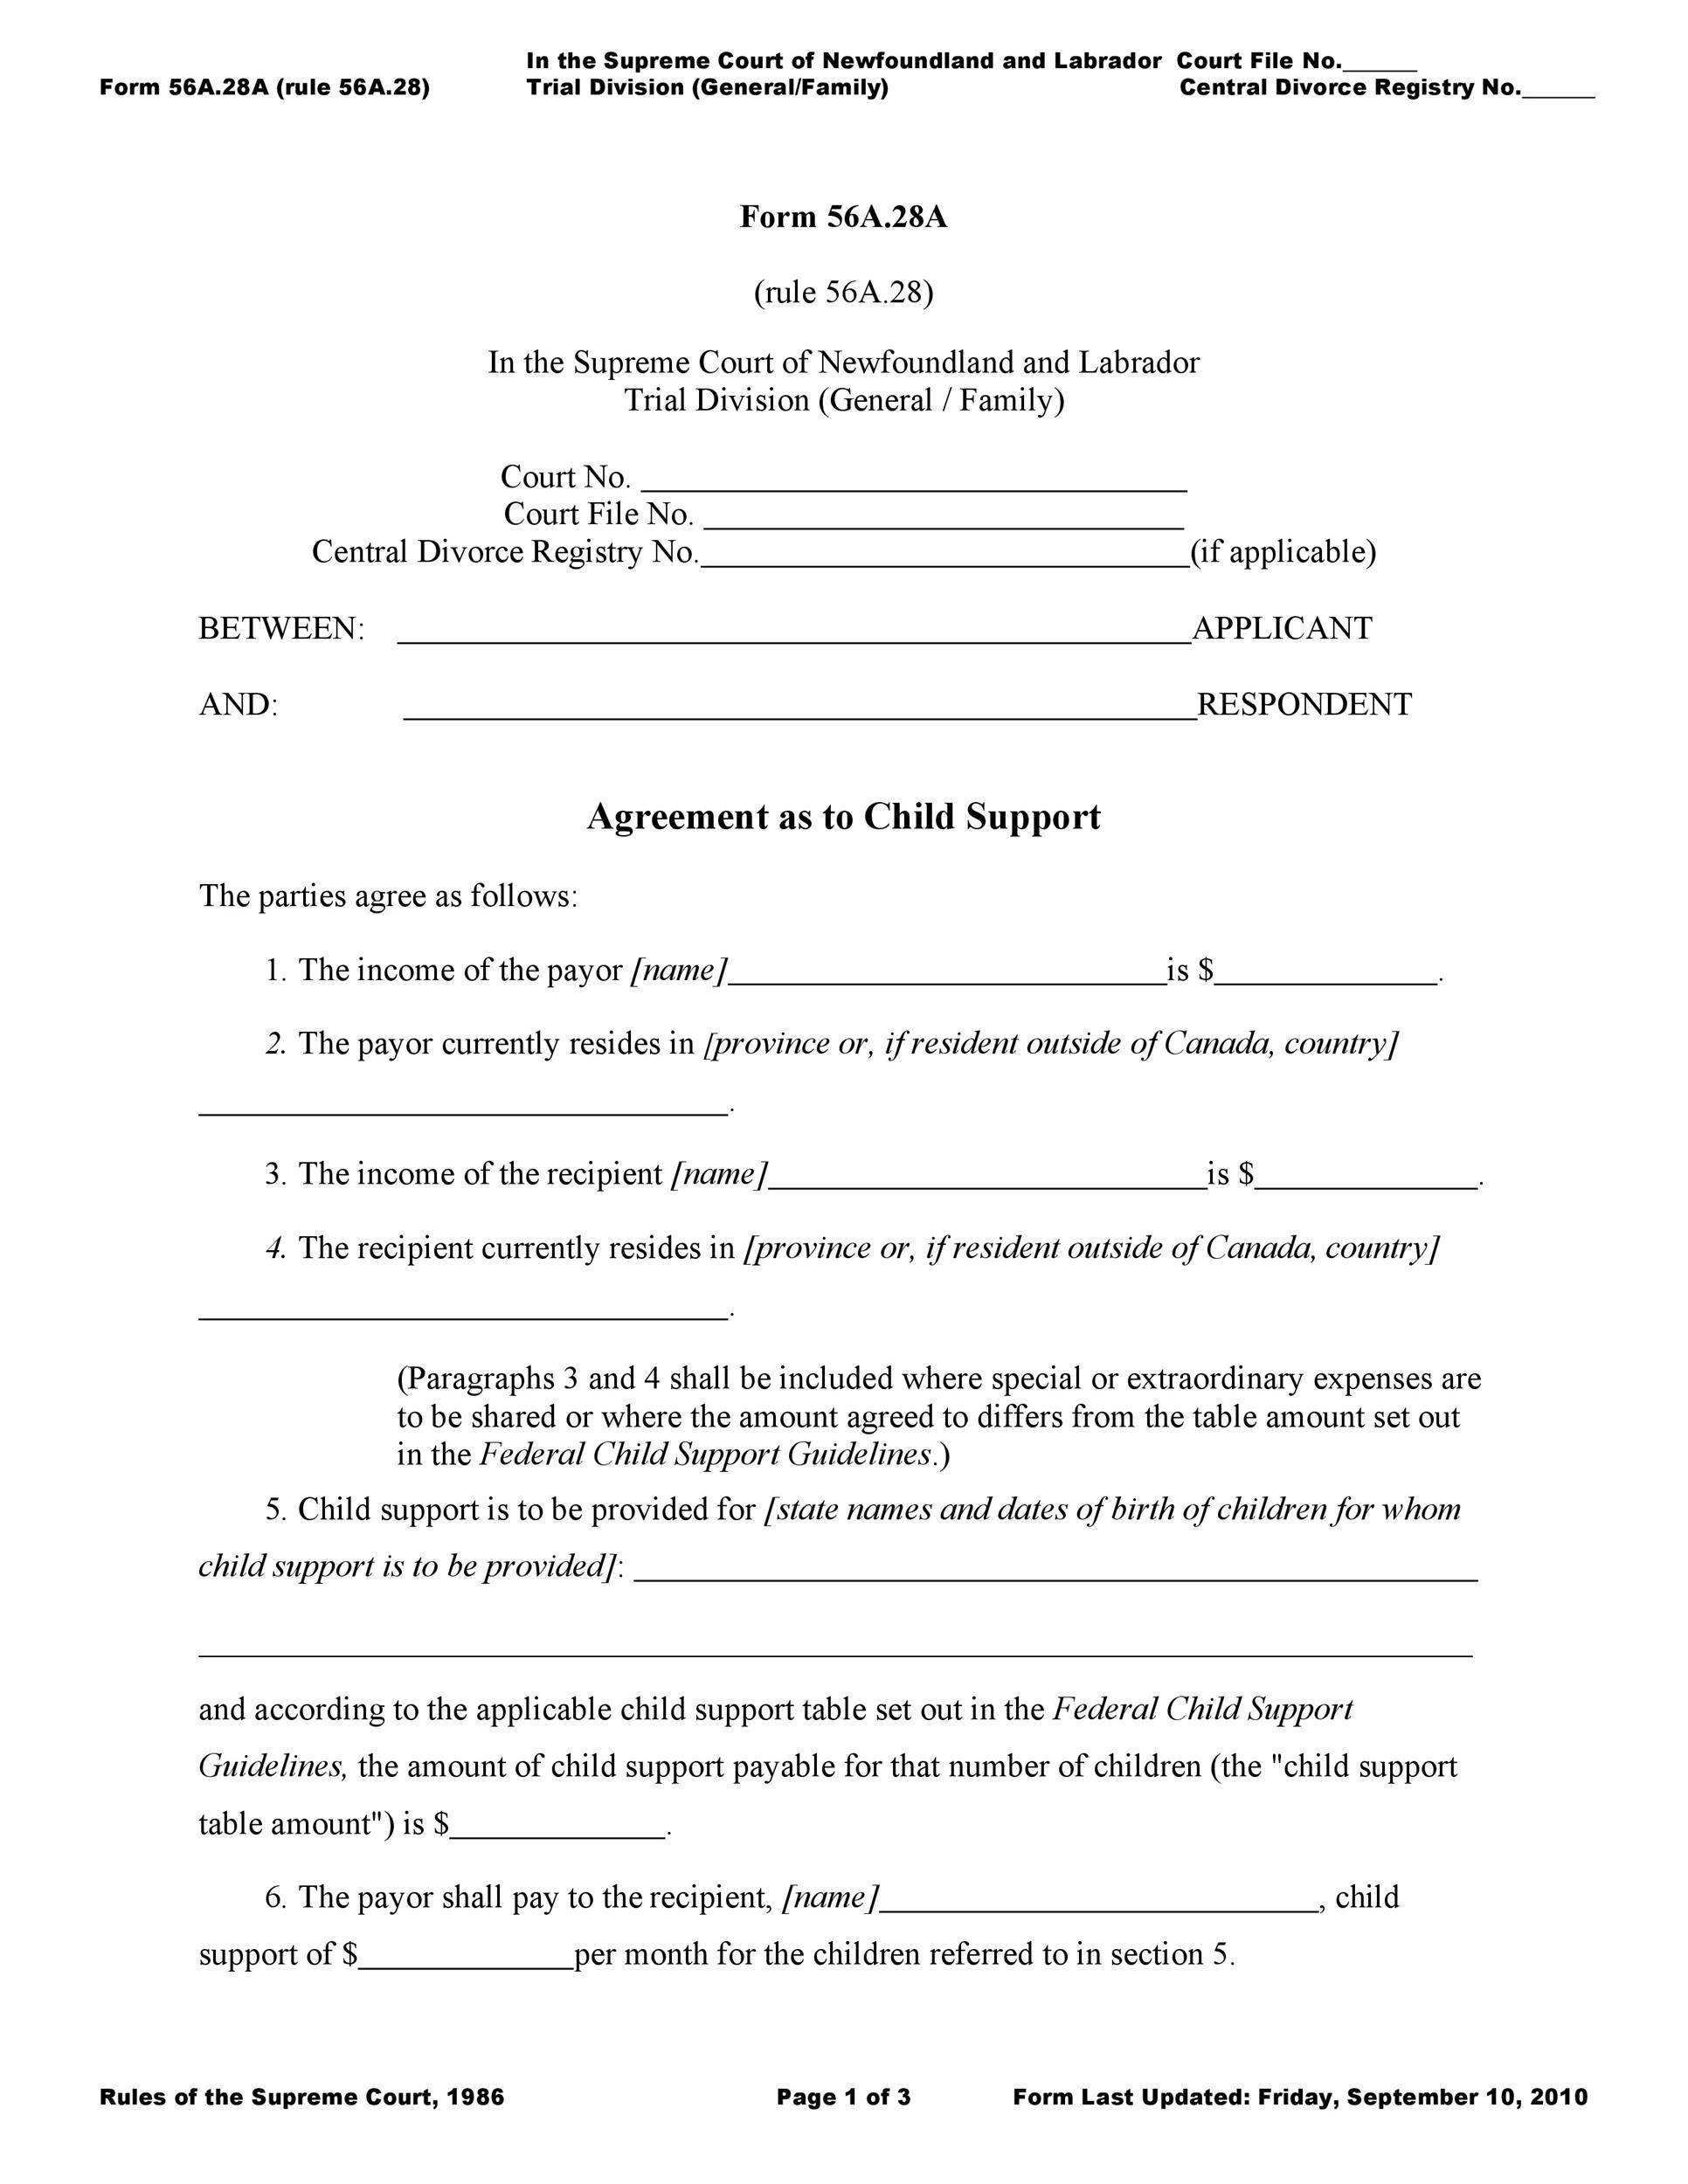 32 Free Child Support Agreement Templates (PDF & MS Word)